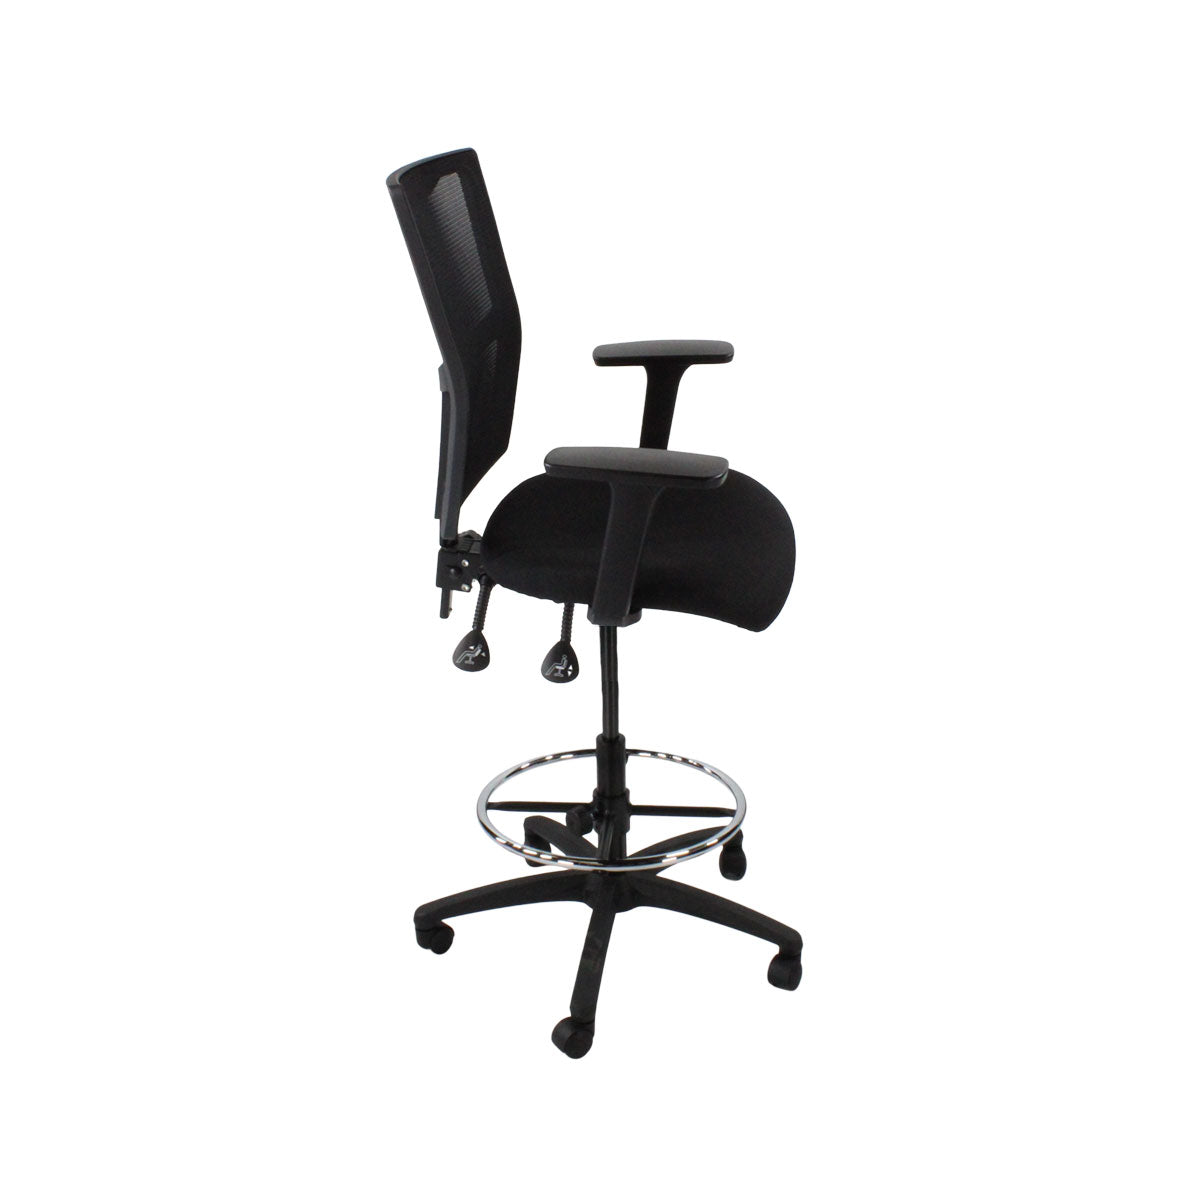 TOC: Ergo 2 Draughtsman Chair in Black Fabric - Refurbished